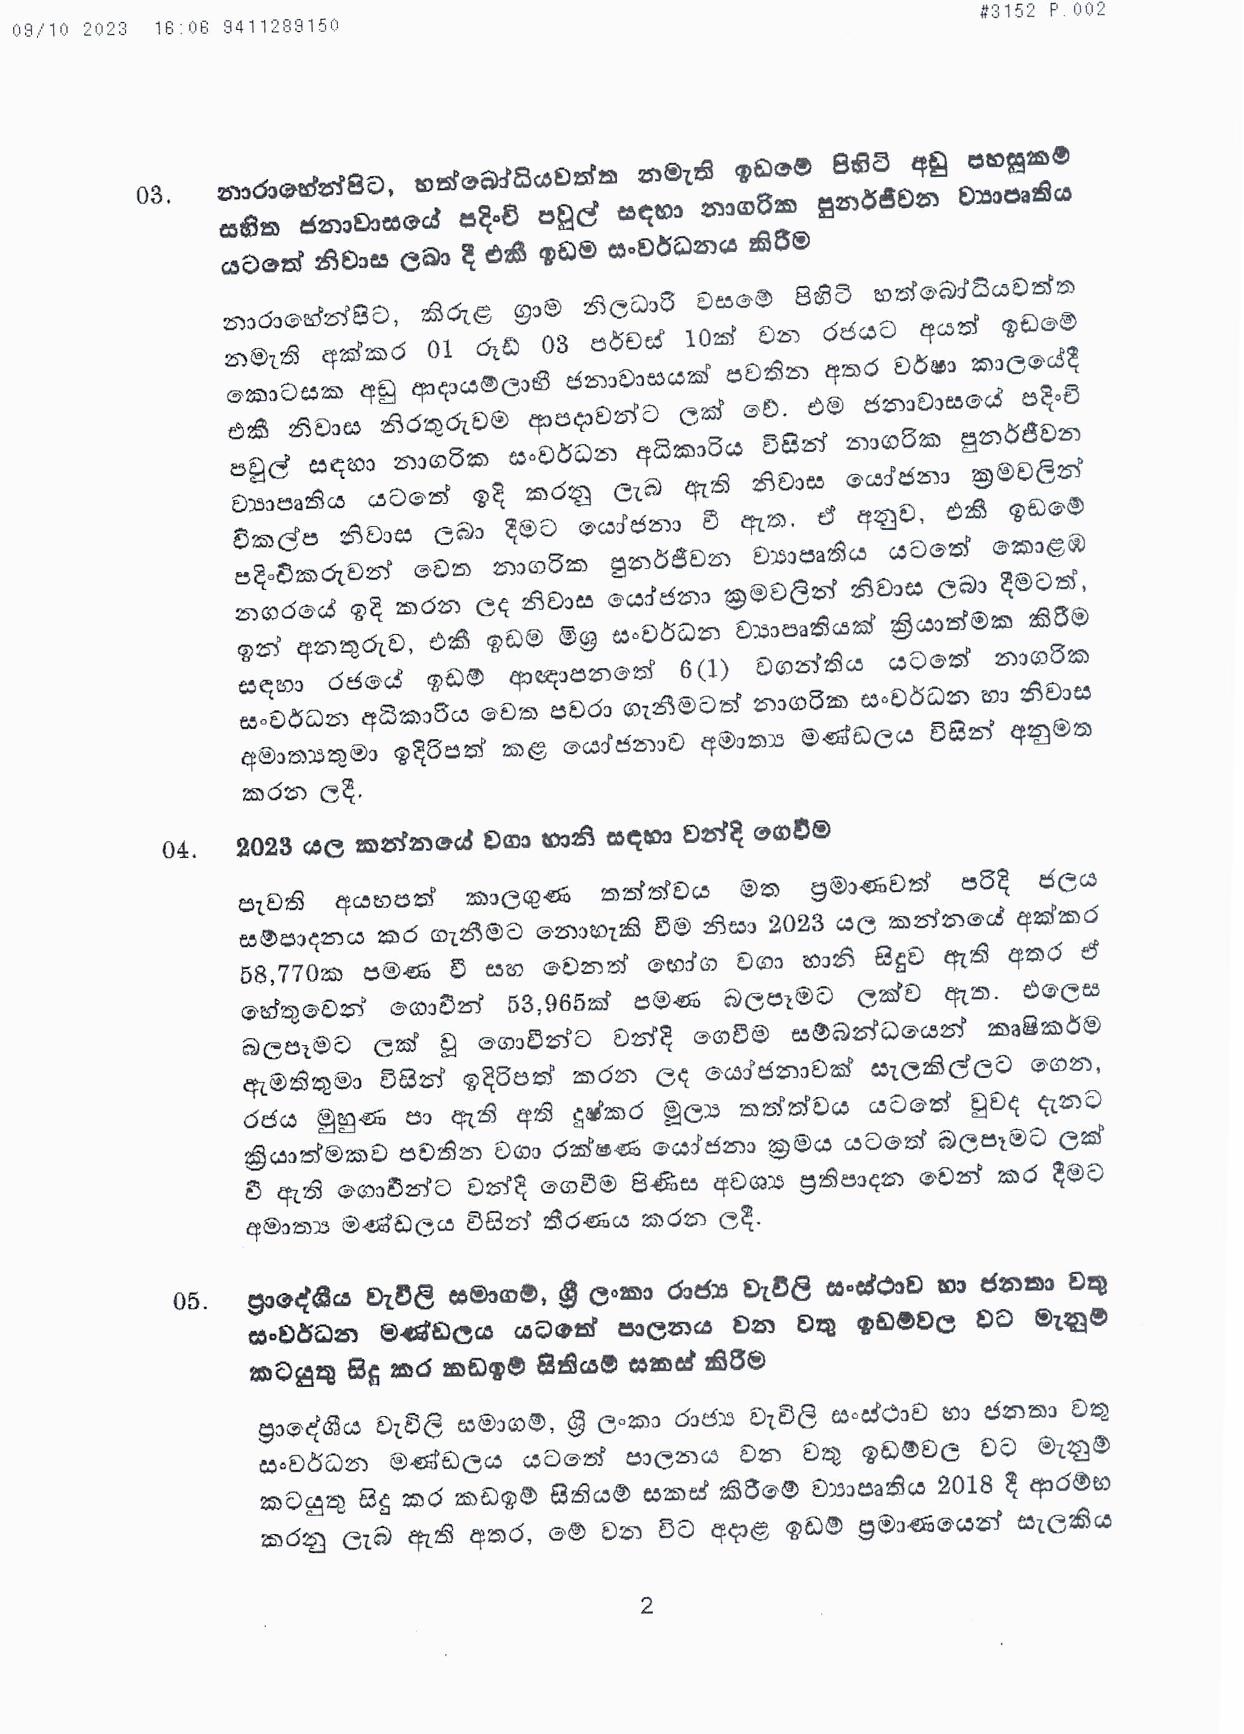 Cabinet Decision on 09.10.2023 page 002